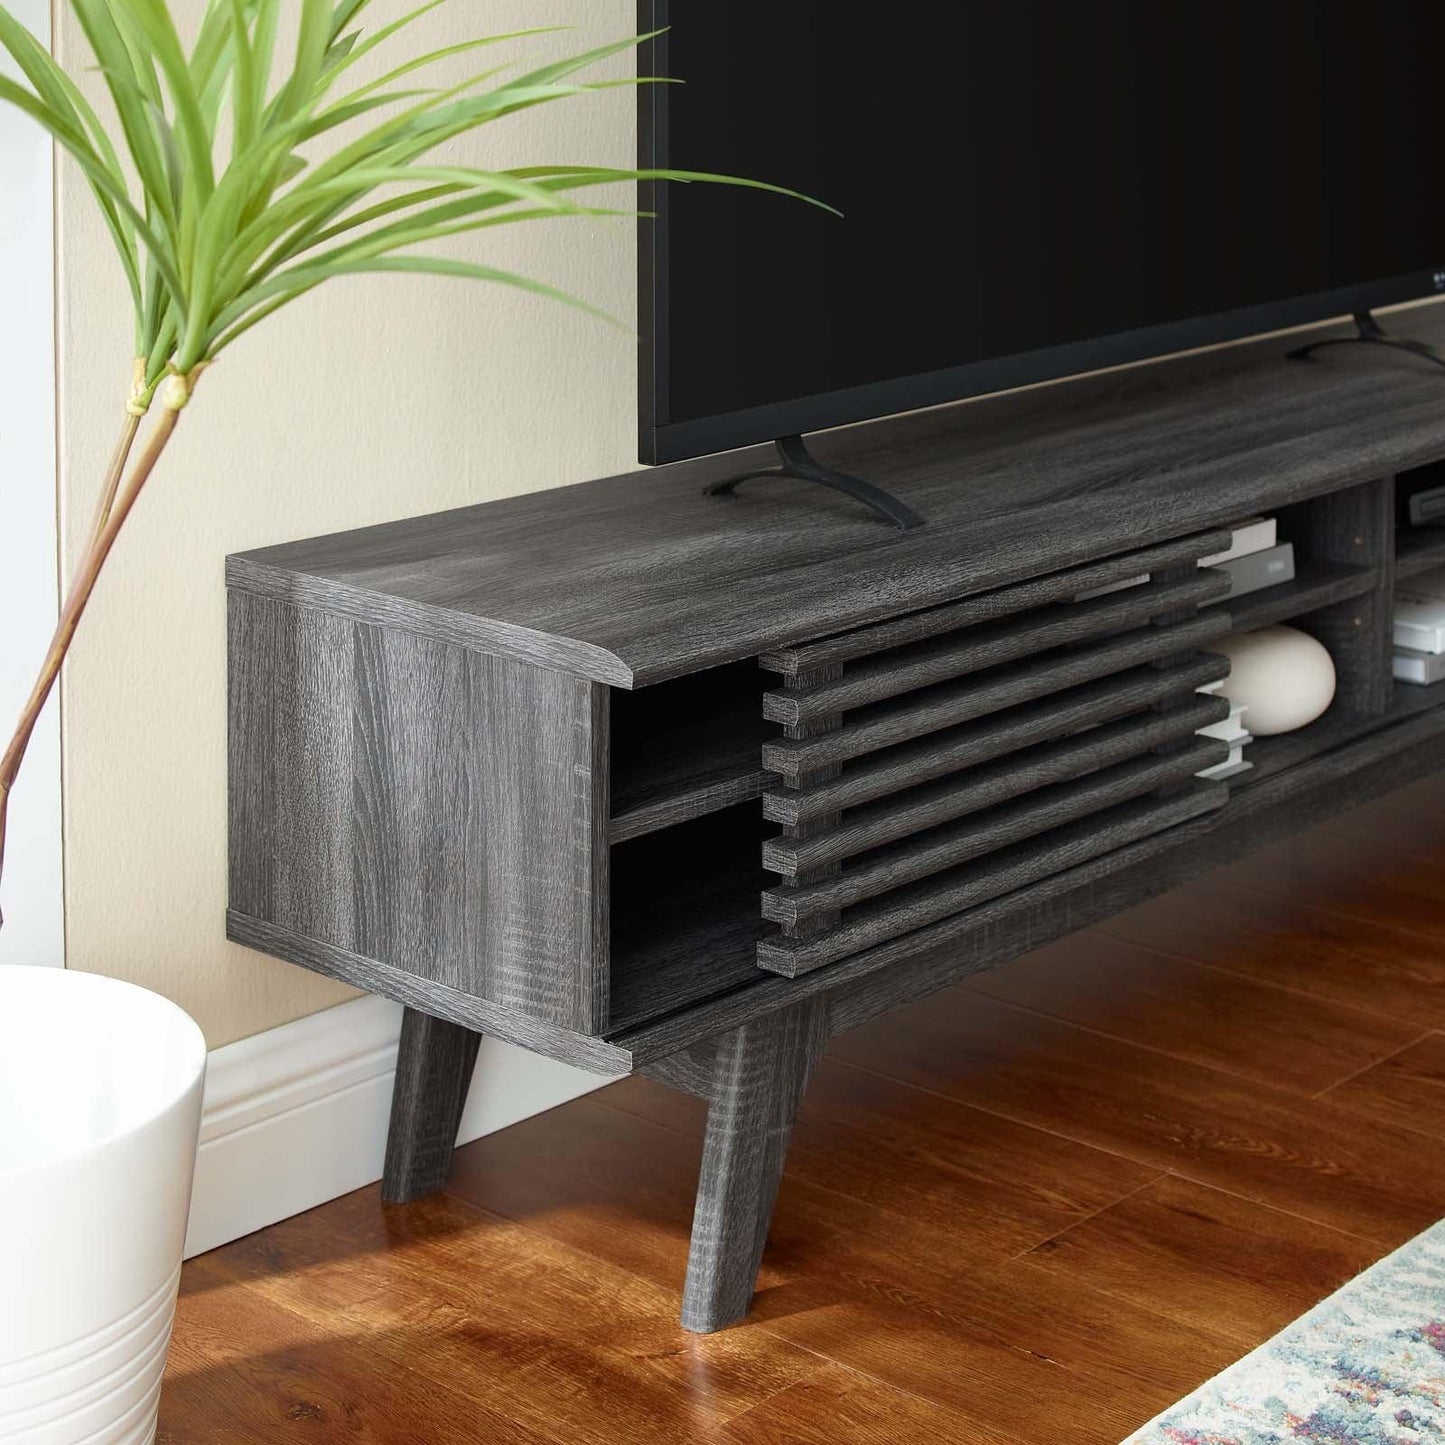 Modway Render 70" Entertainment Center TV Stand FredCo